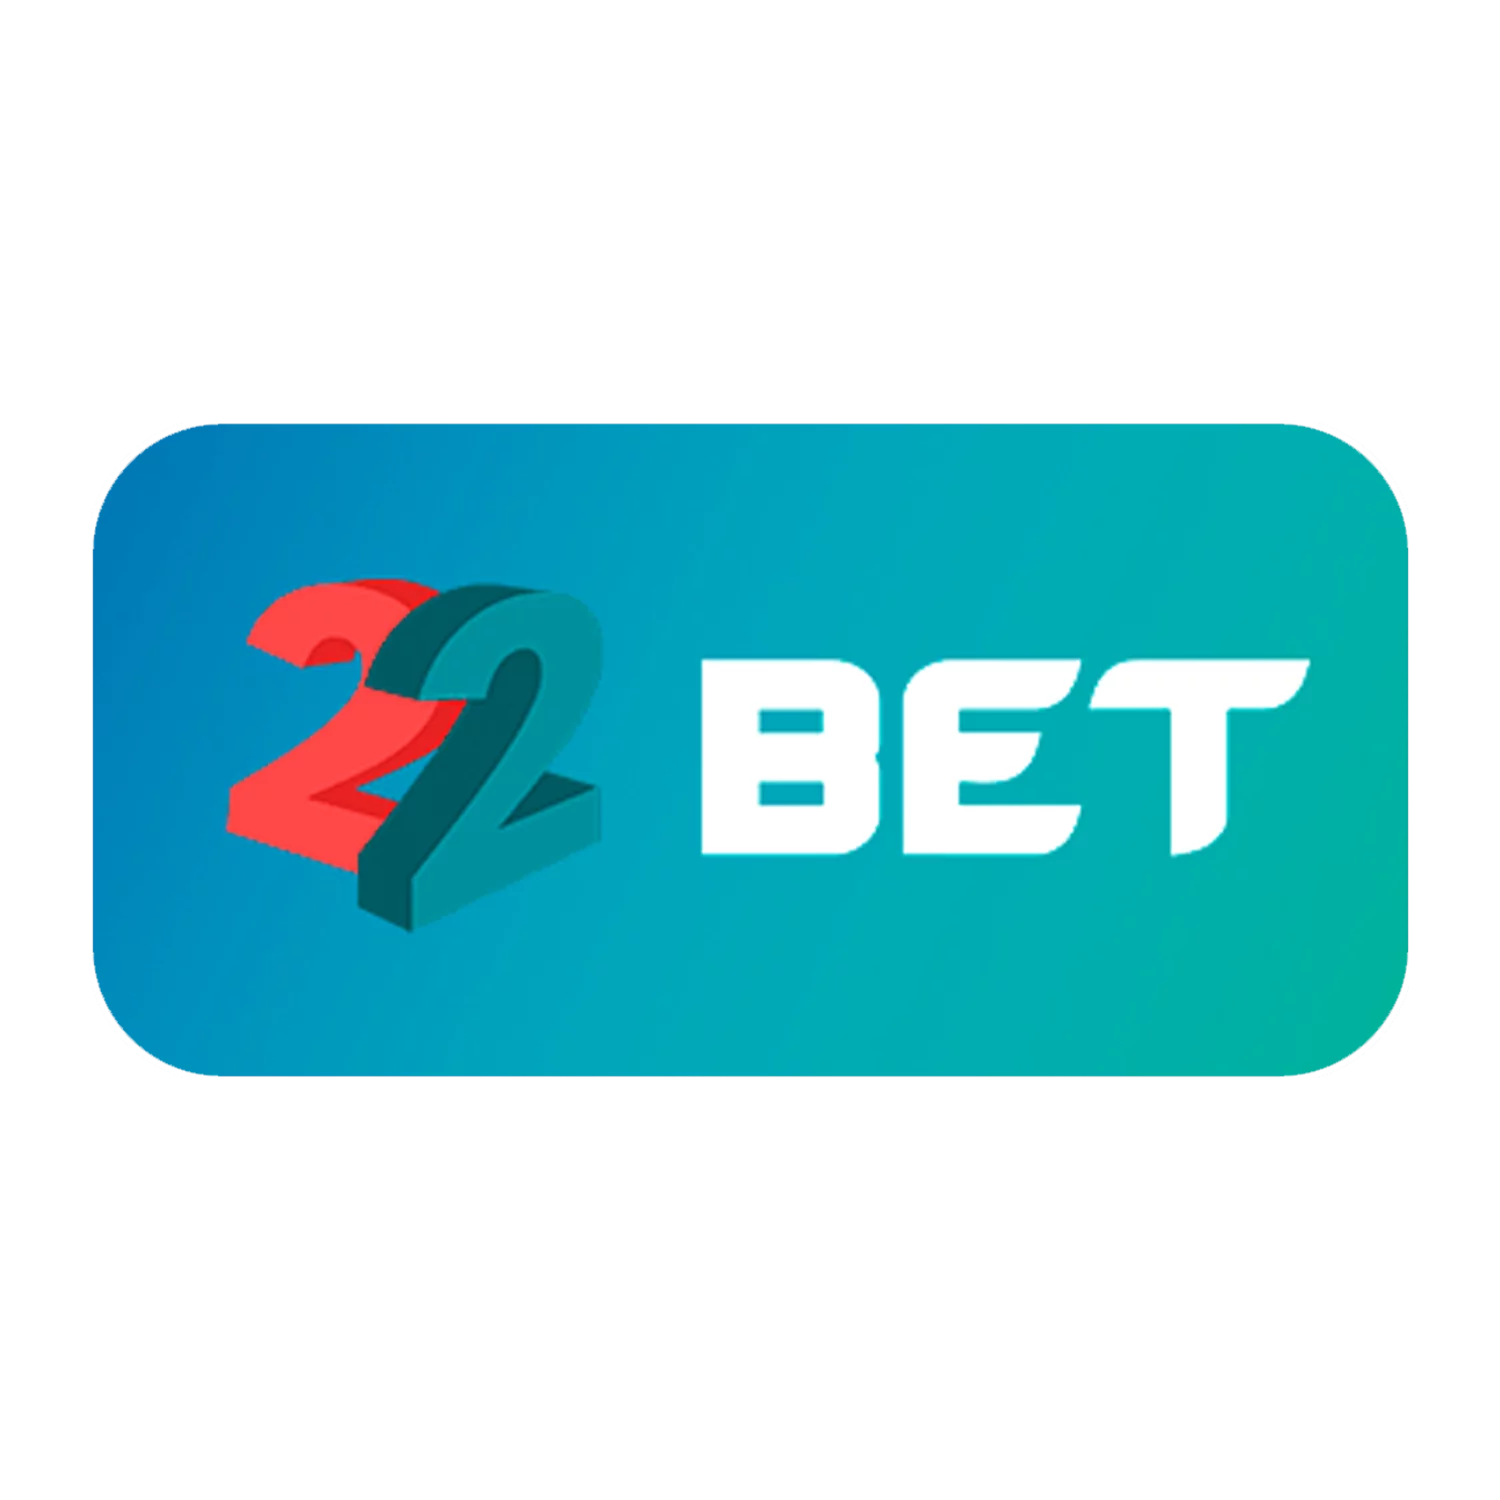 Learn how to place bets on cricket on the 22bets.